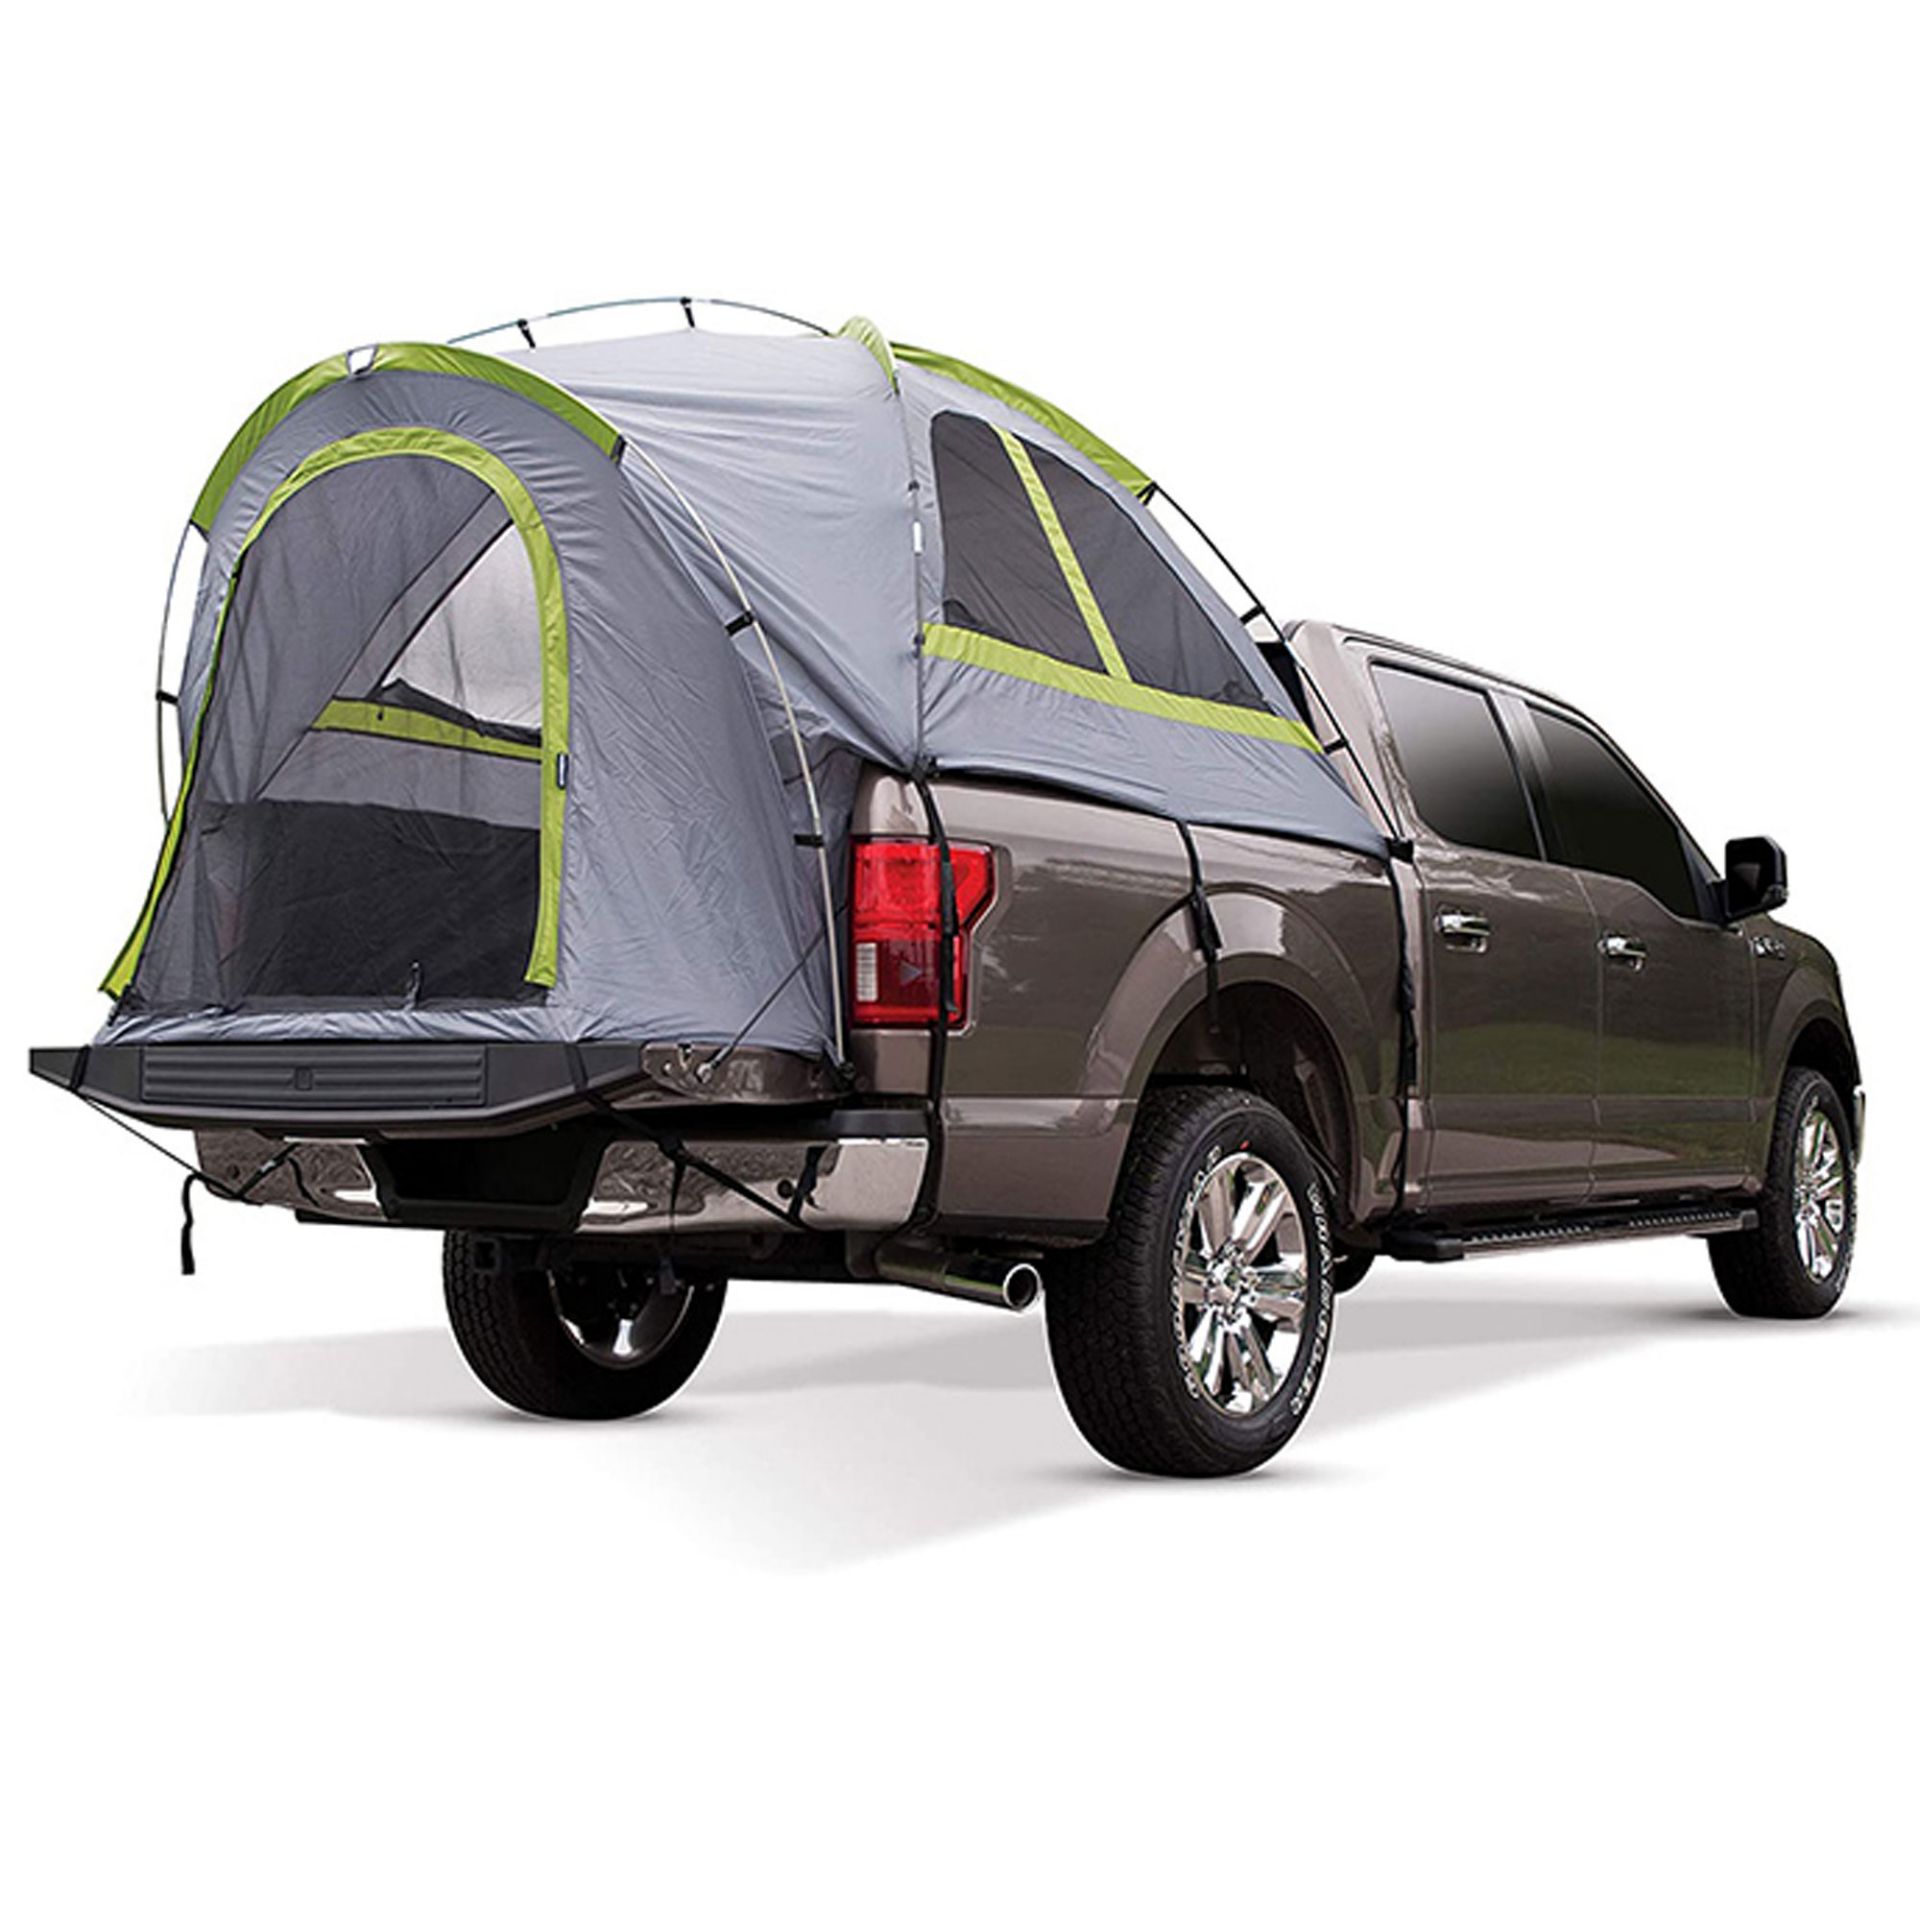 UNITS - RBSM LARGE TRUCK CAMPING TENT W/ RAINFLY (NEW) (MSRP $300)